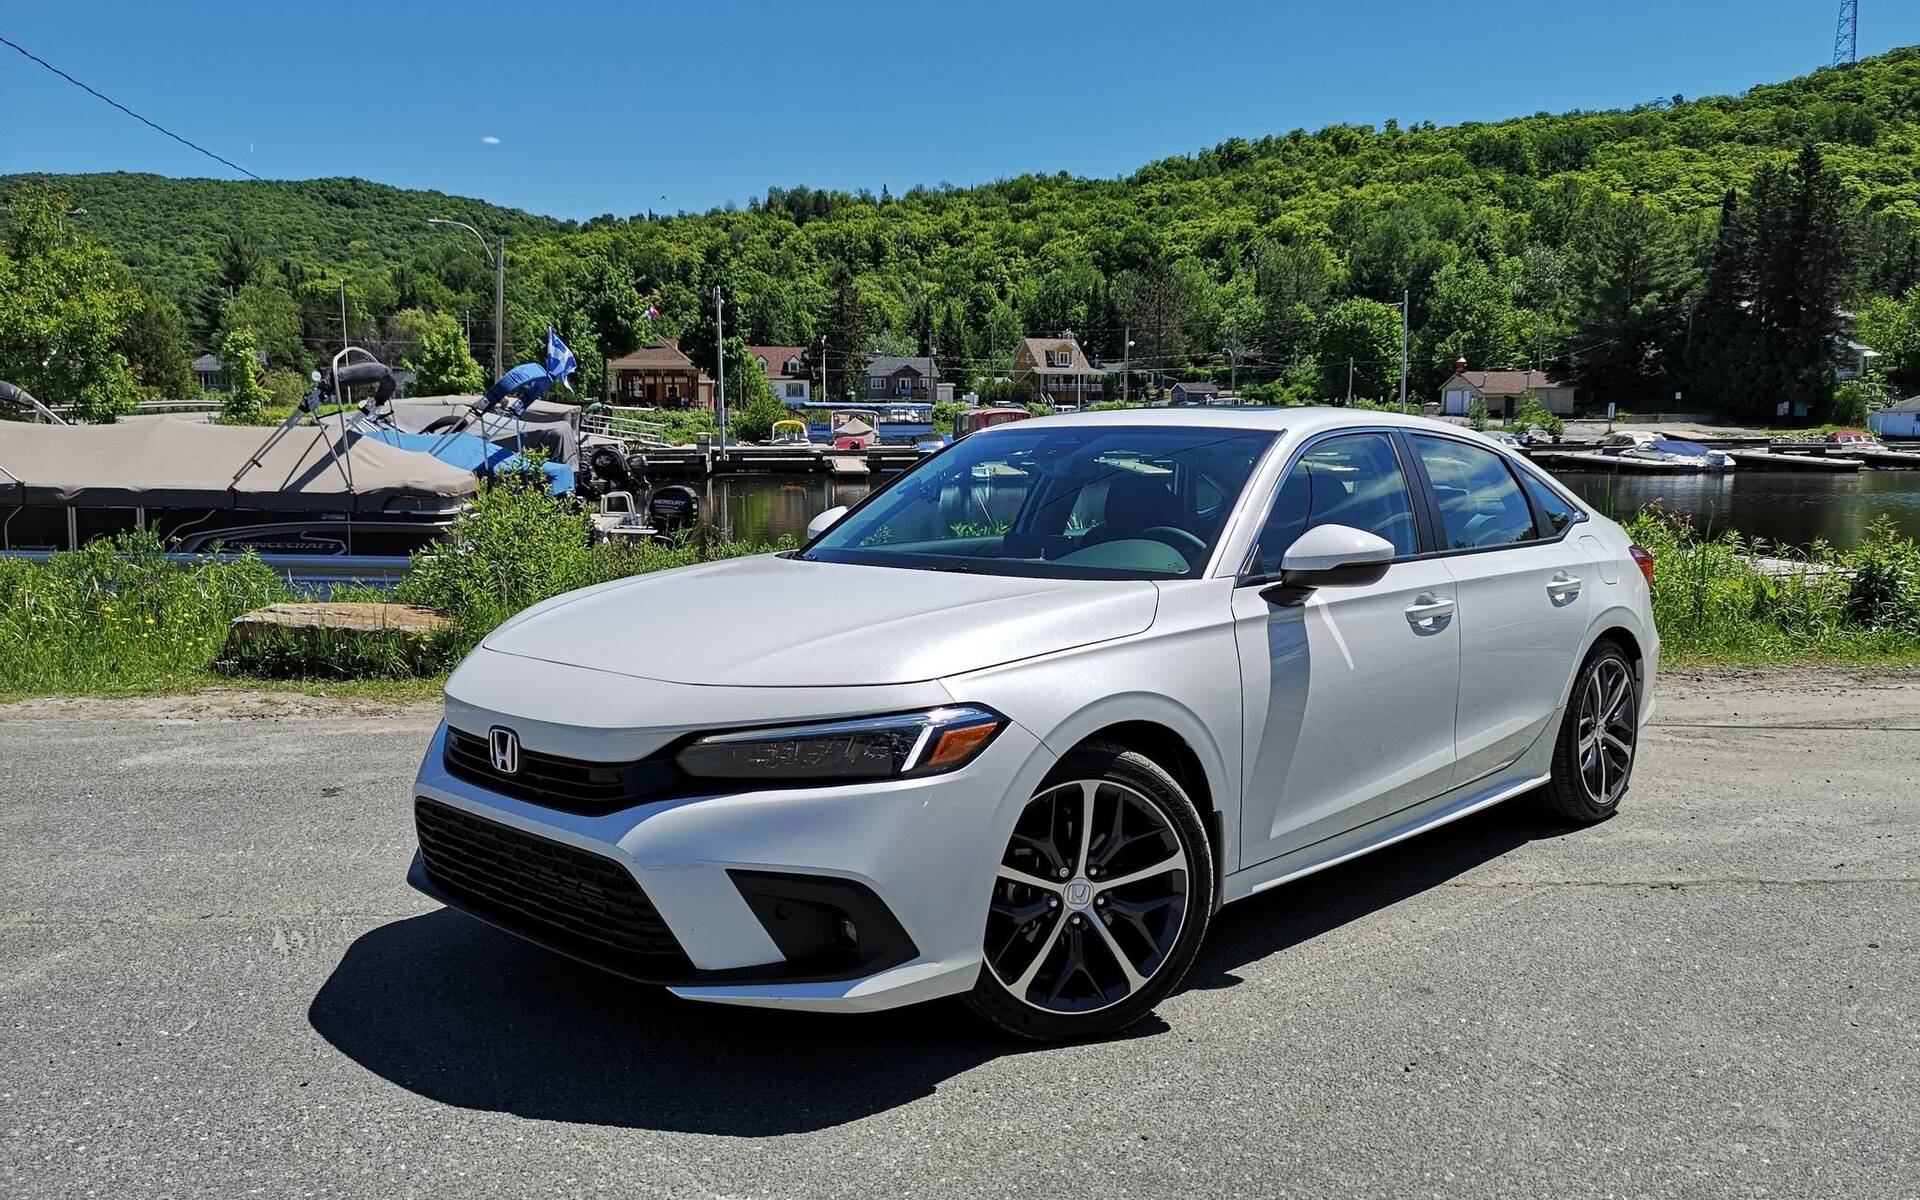 We're Driving the 2022 Honda Civic This Week - The Car Guide